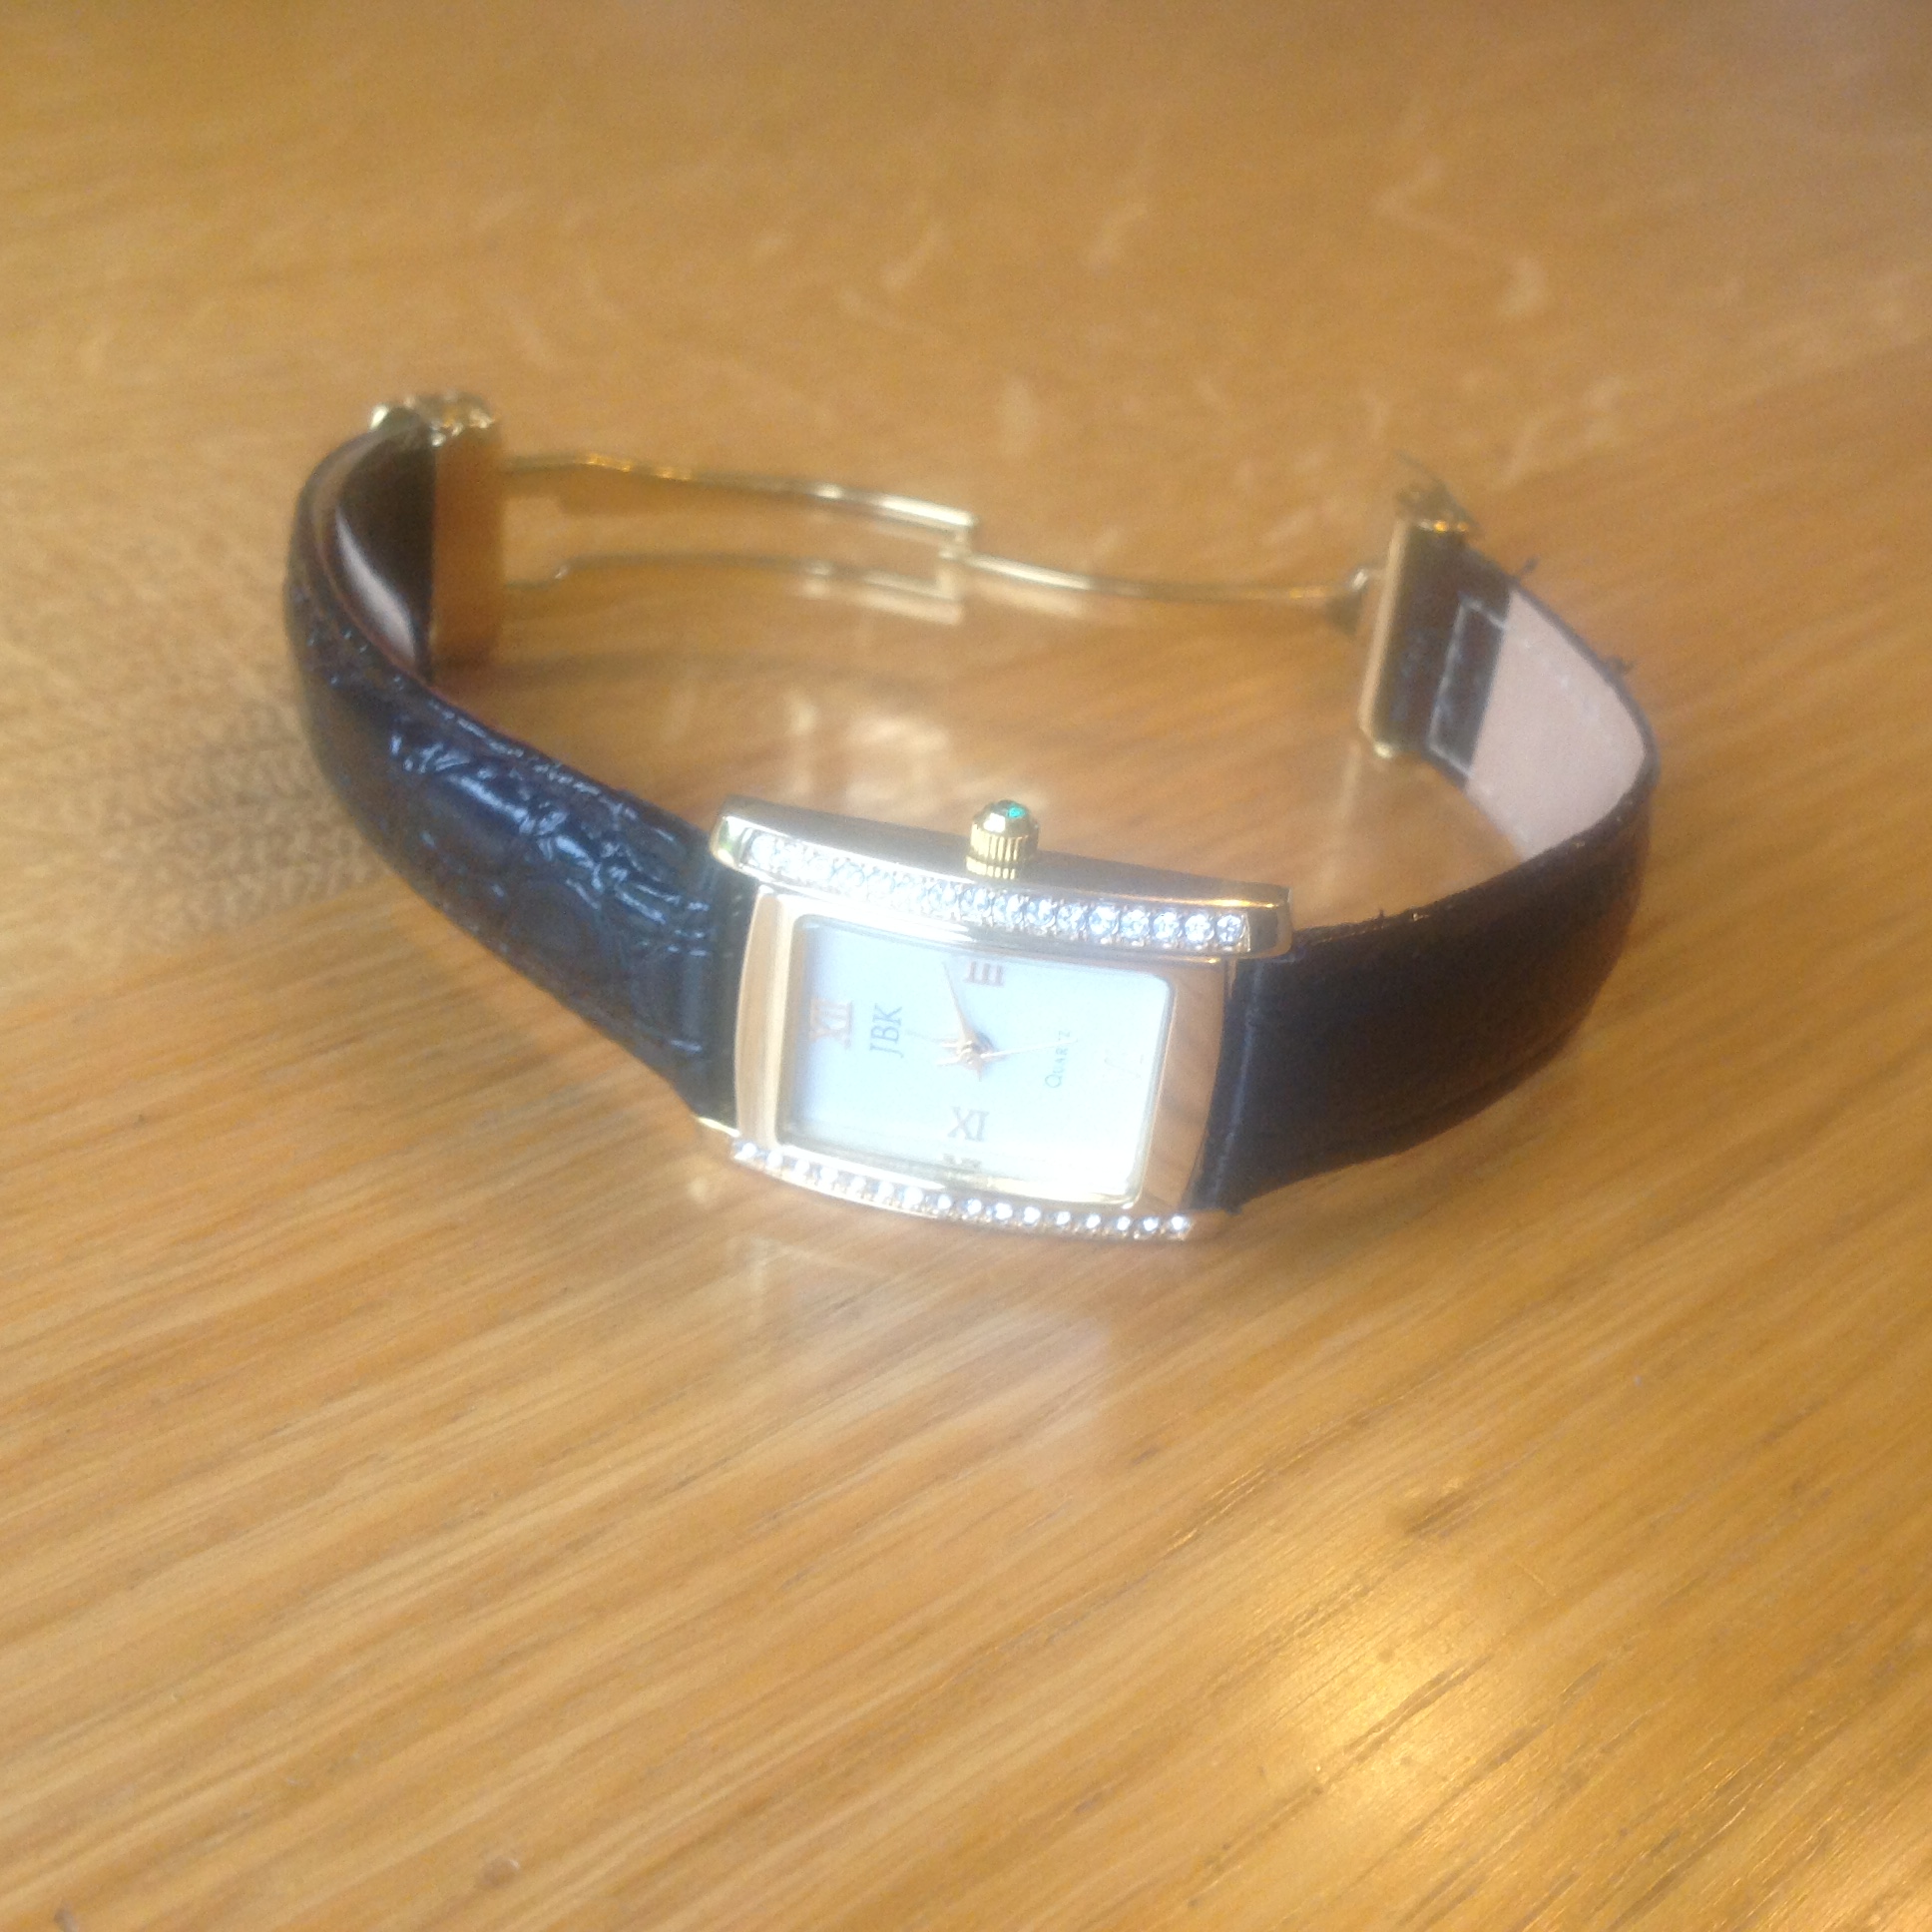 Watch from the JBK (Jacqueline Bouvier Kennedy) Collection by Camrose & Kross (Seiko) - Image 5 of 6